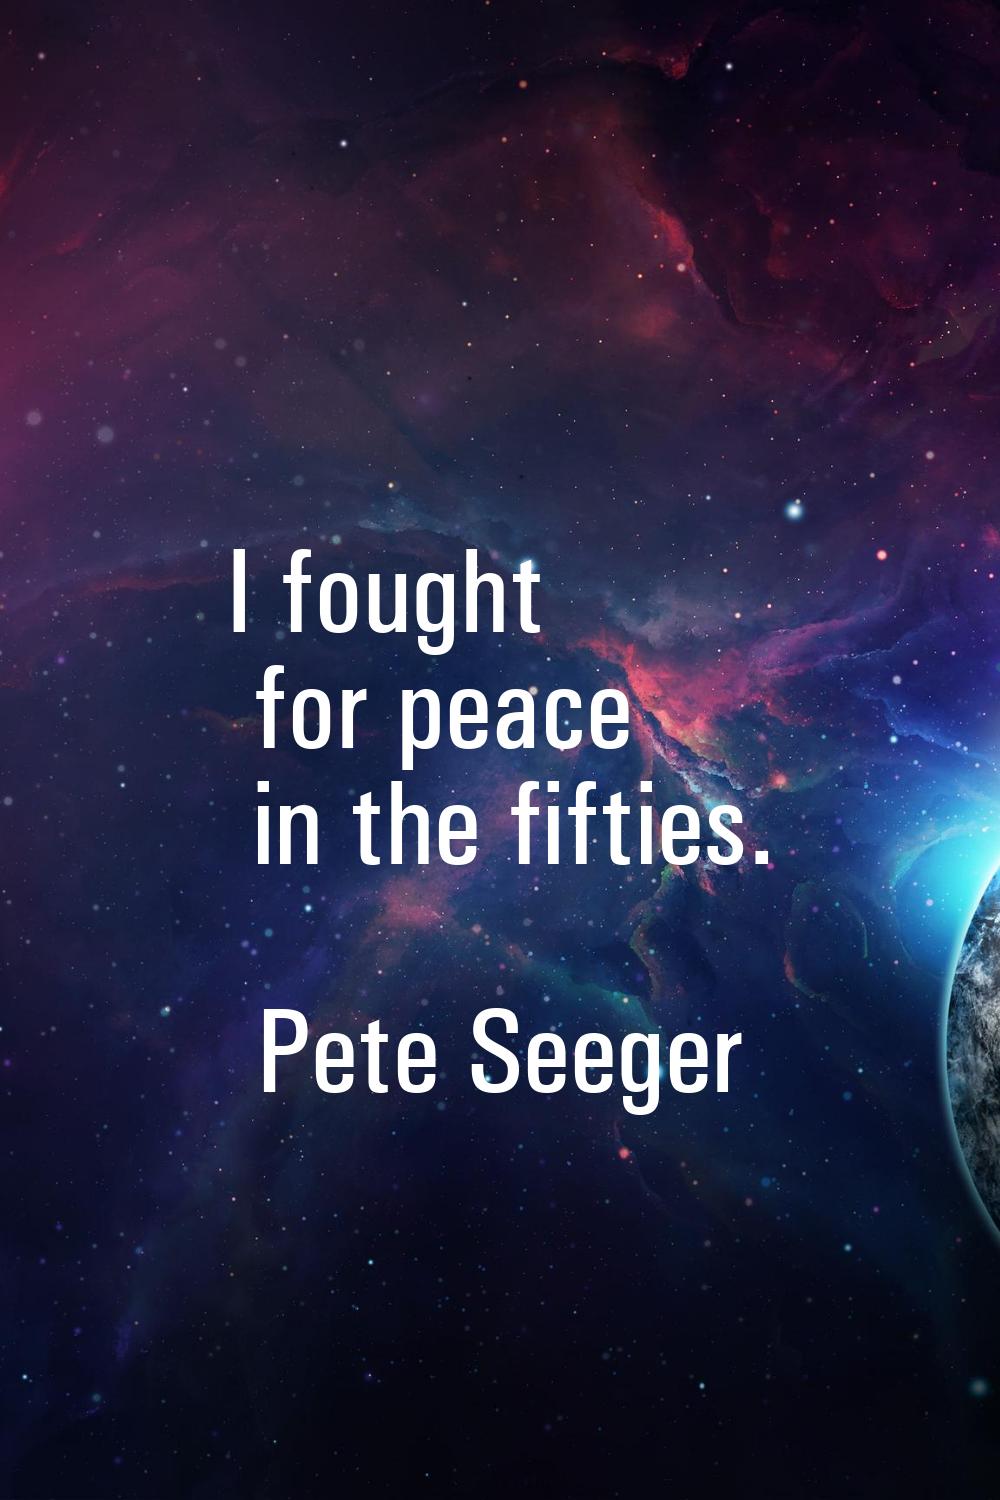 I fought for peace in the fifties.